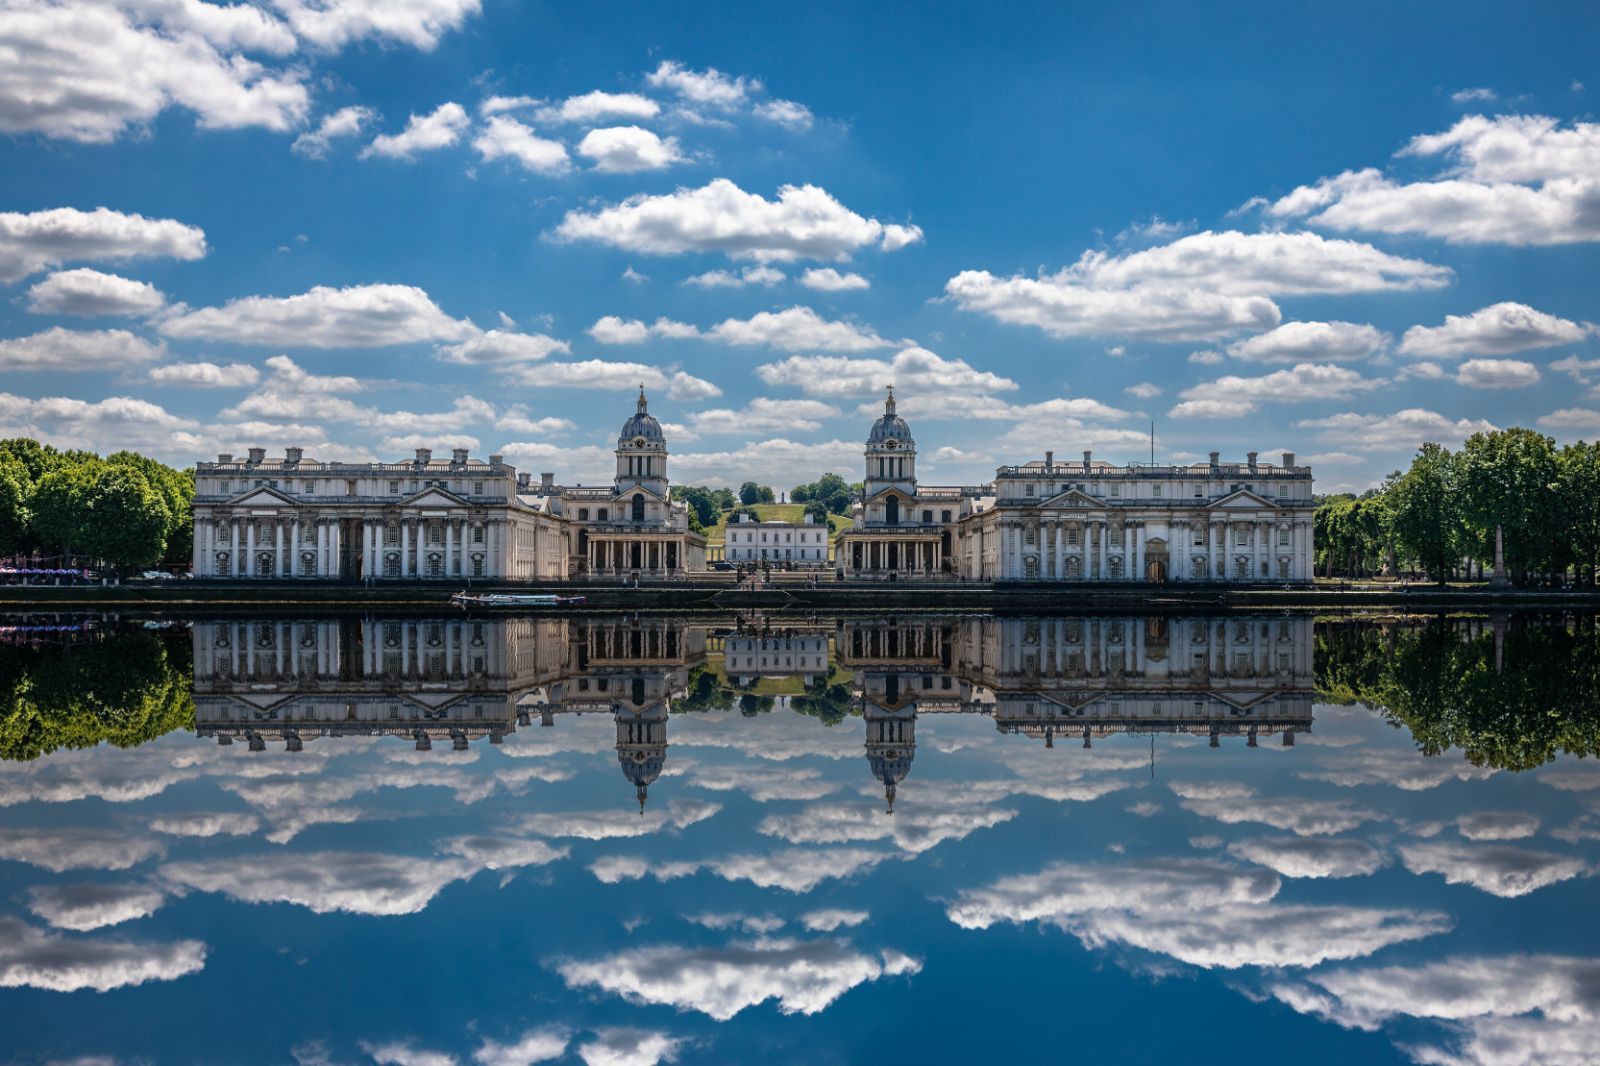 Reflections on the water outside Greenwich Naval College in Great Britain